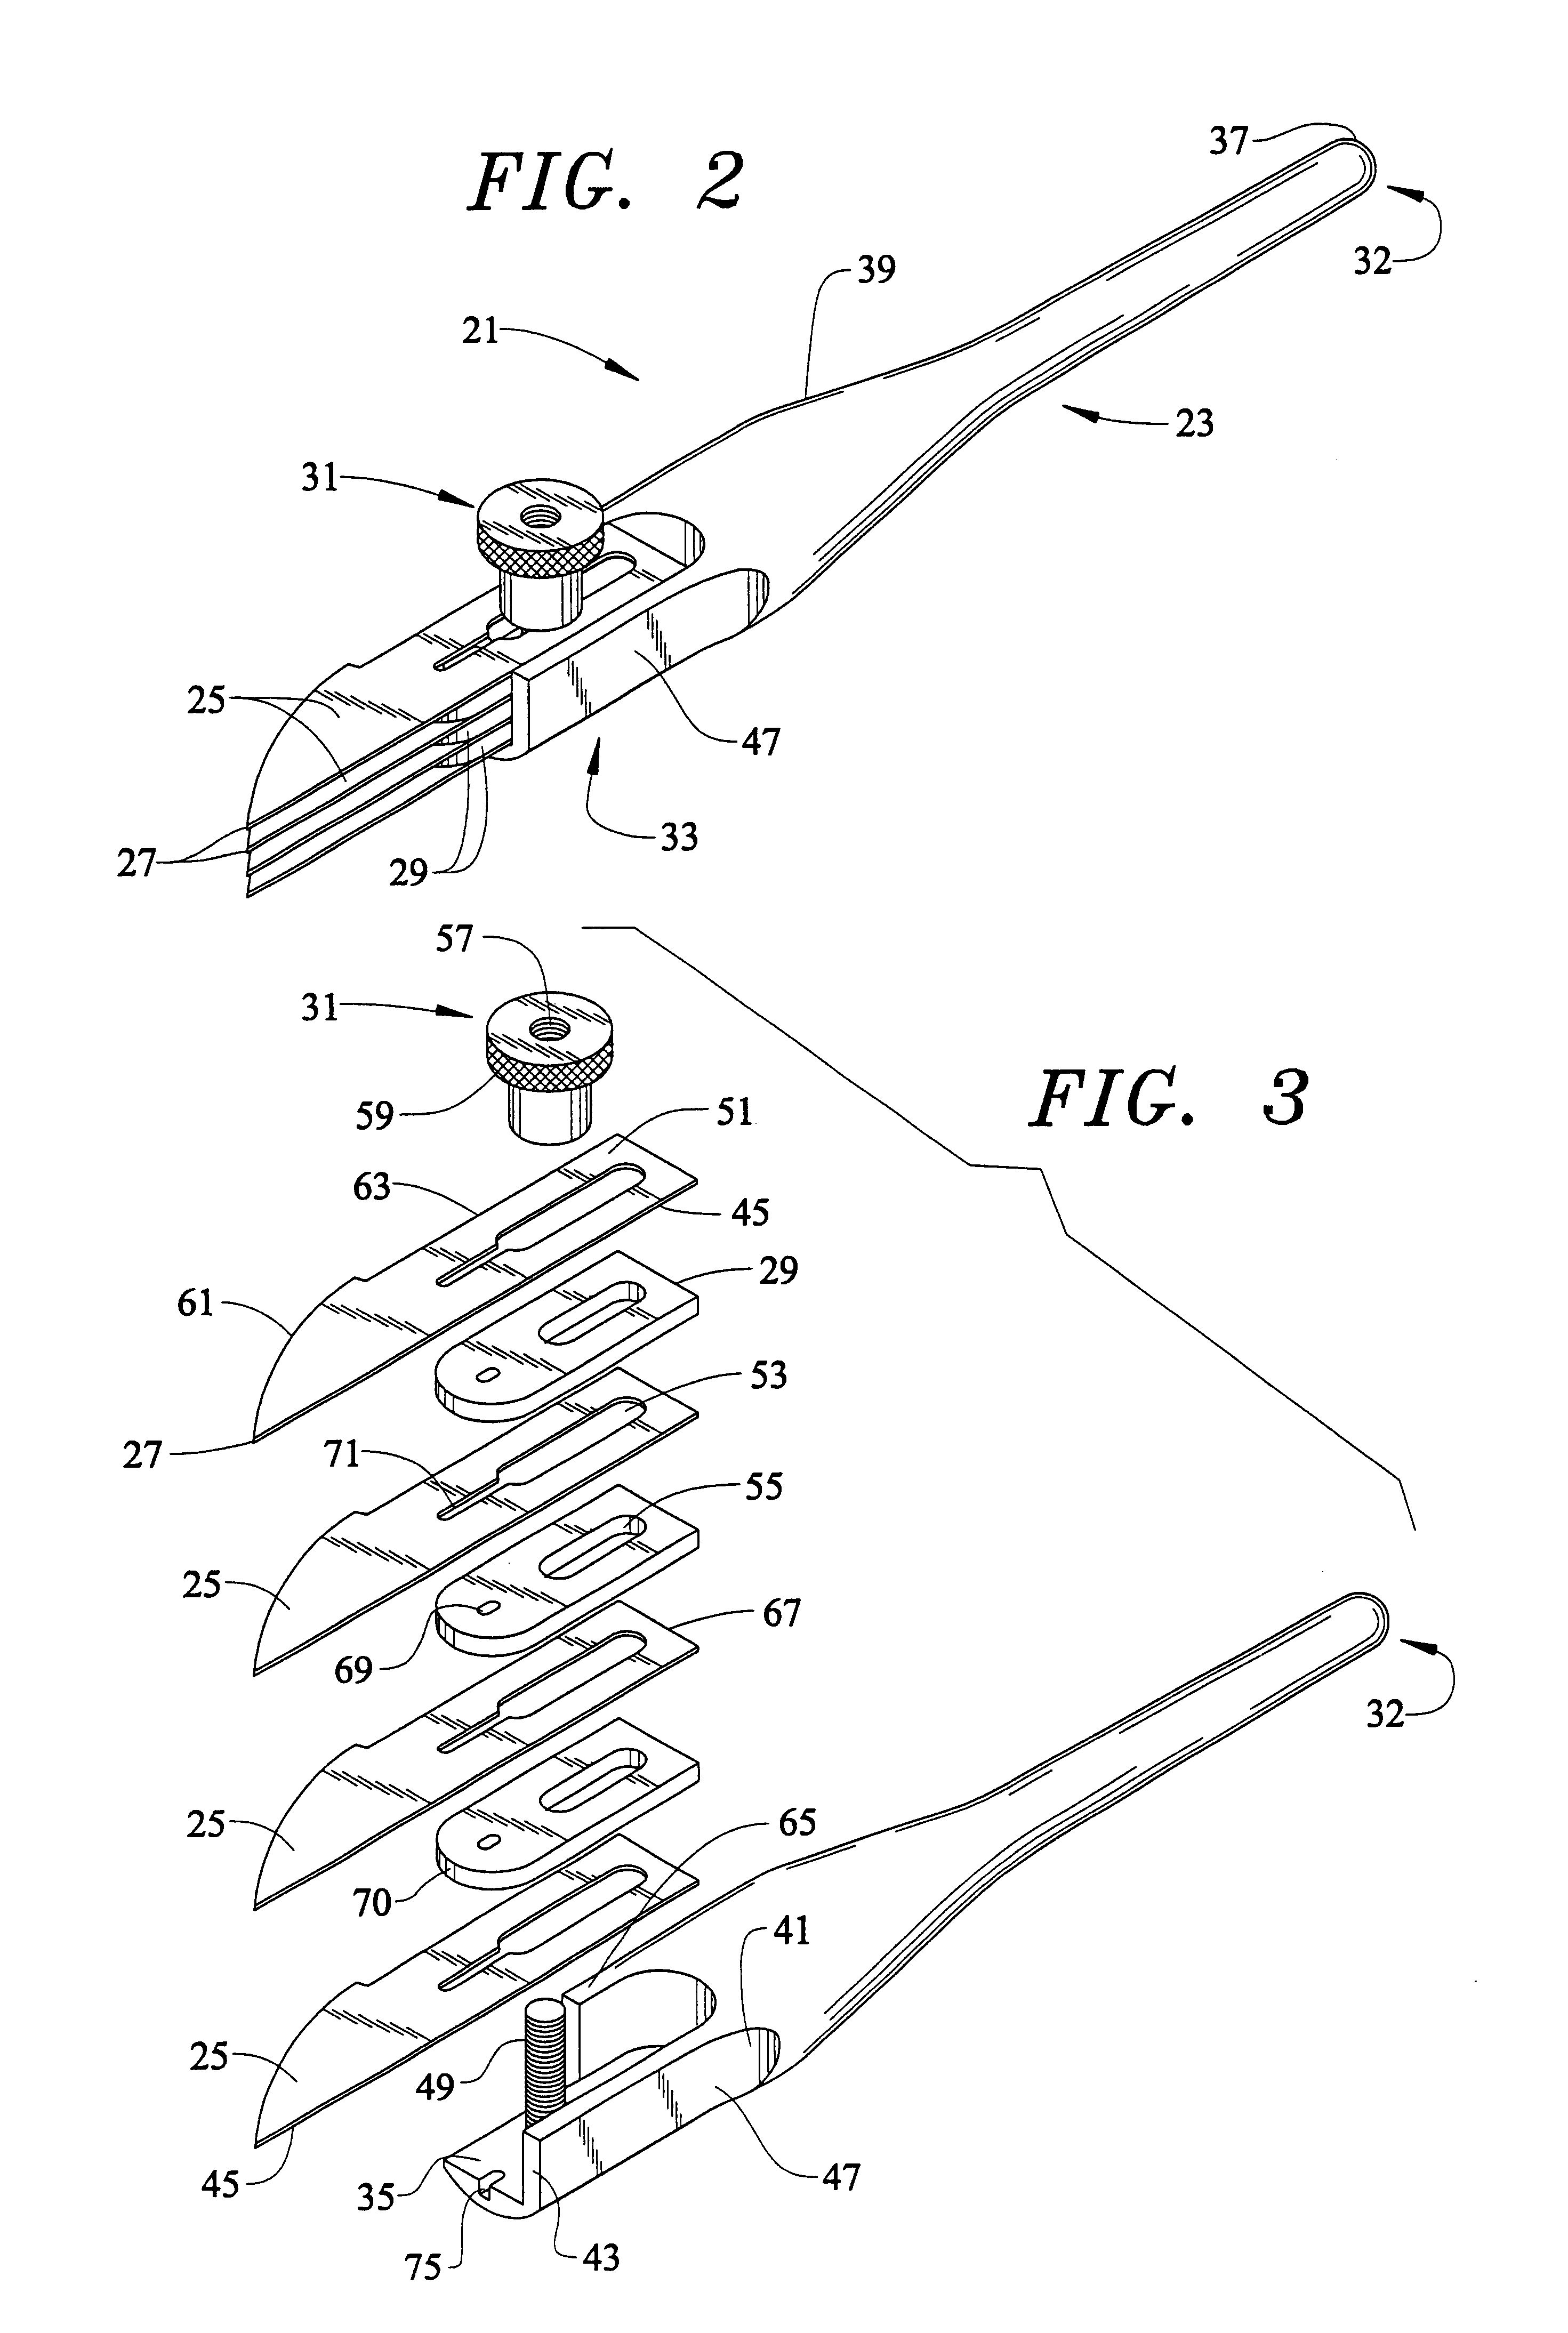 Multiple bladed surgical knife and method of use